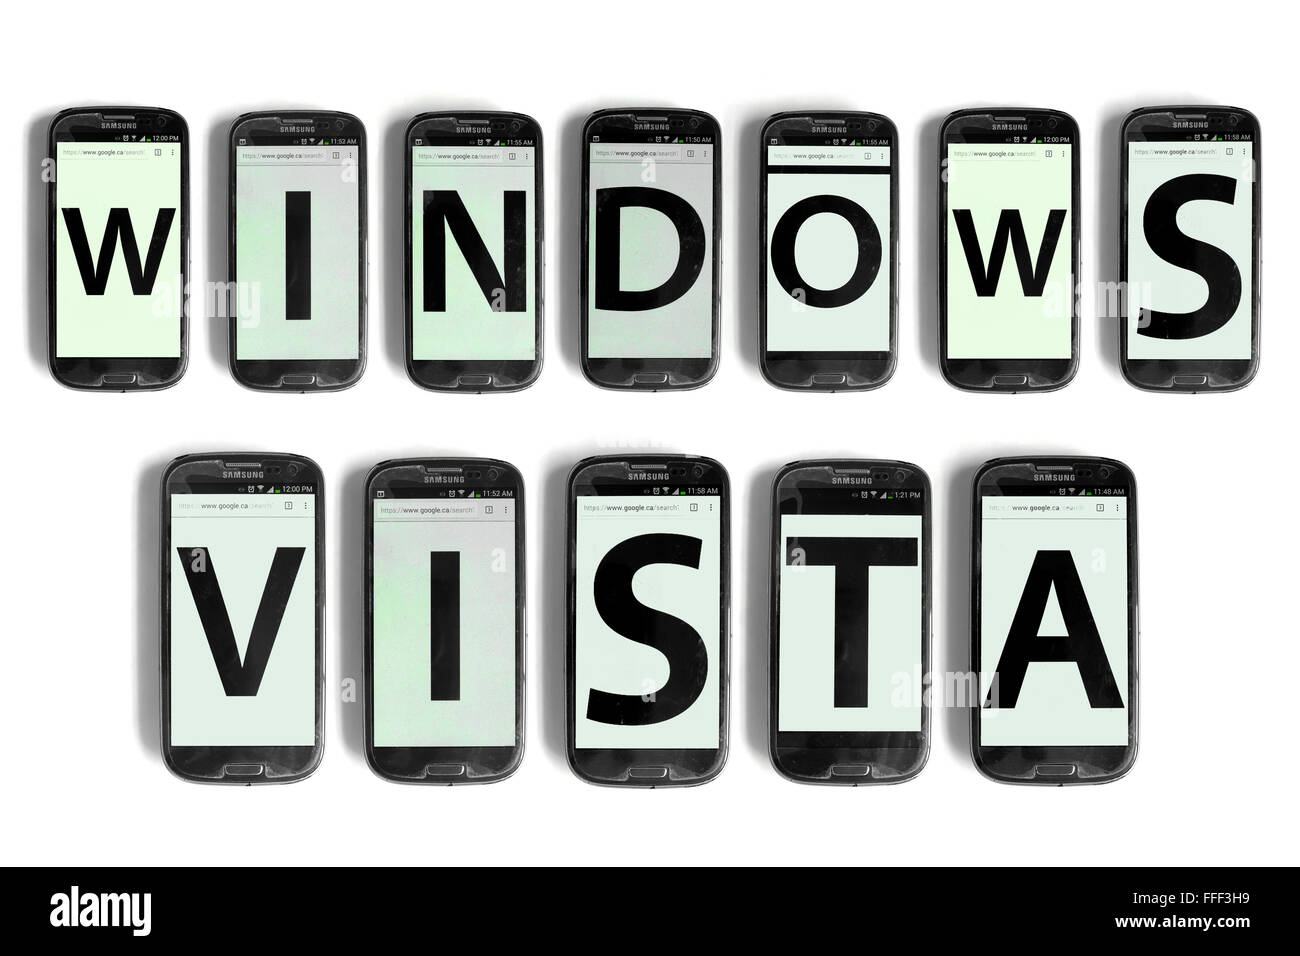 Windows Vista written on the screens of smartphones photographed against a white background. Stock Photo